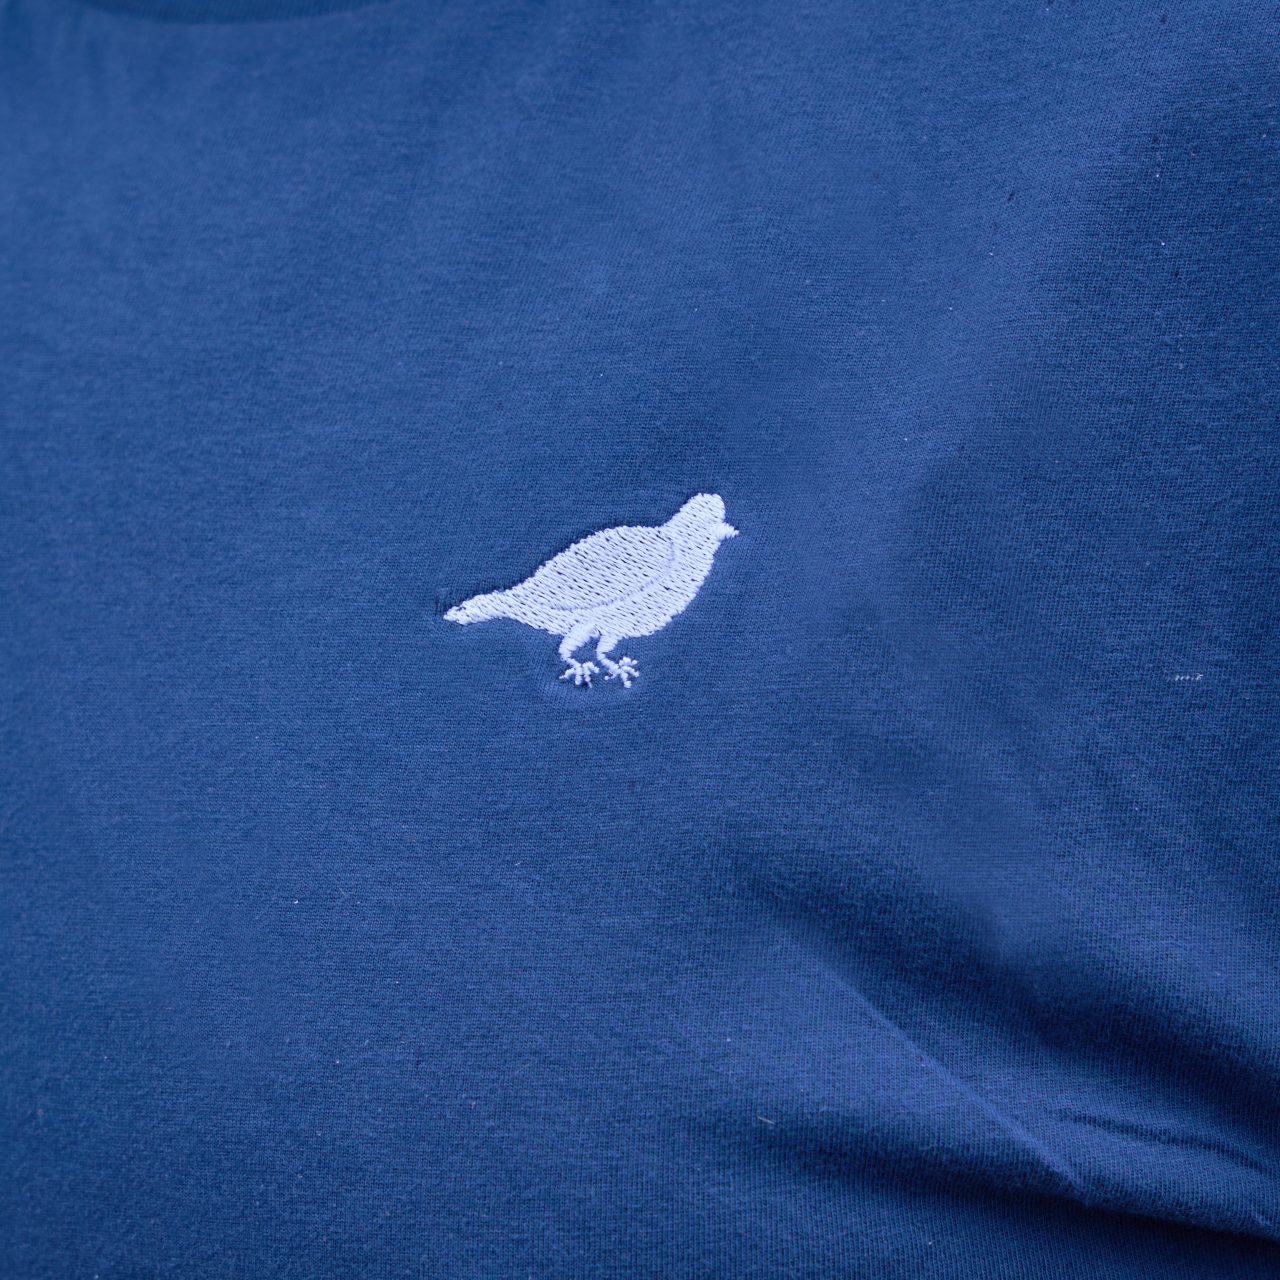 Detail shot of navy blue shirt front side with pigeon embroidered on left side